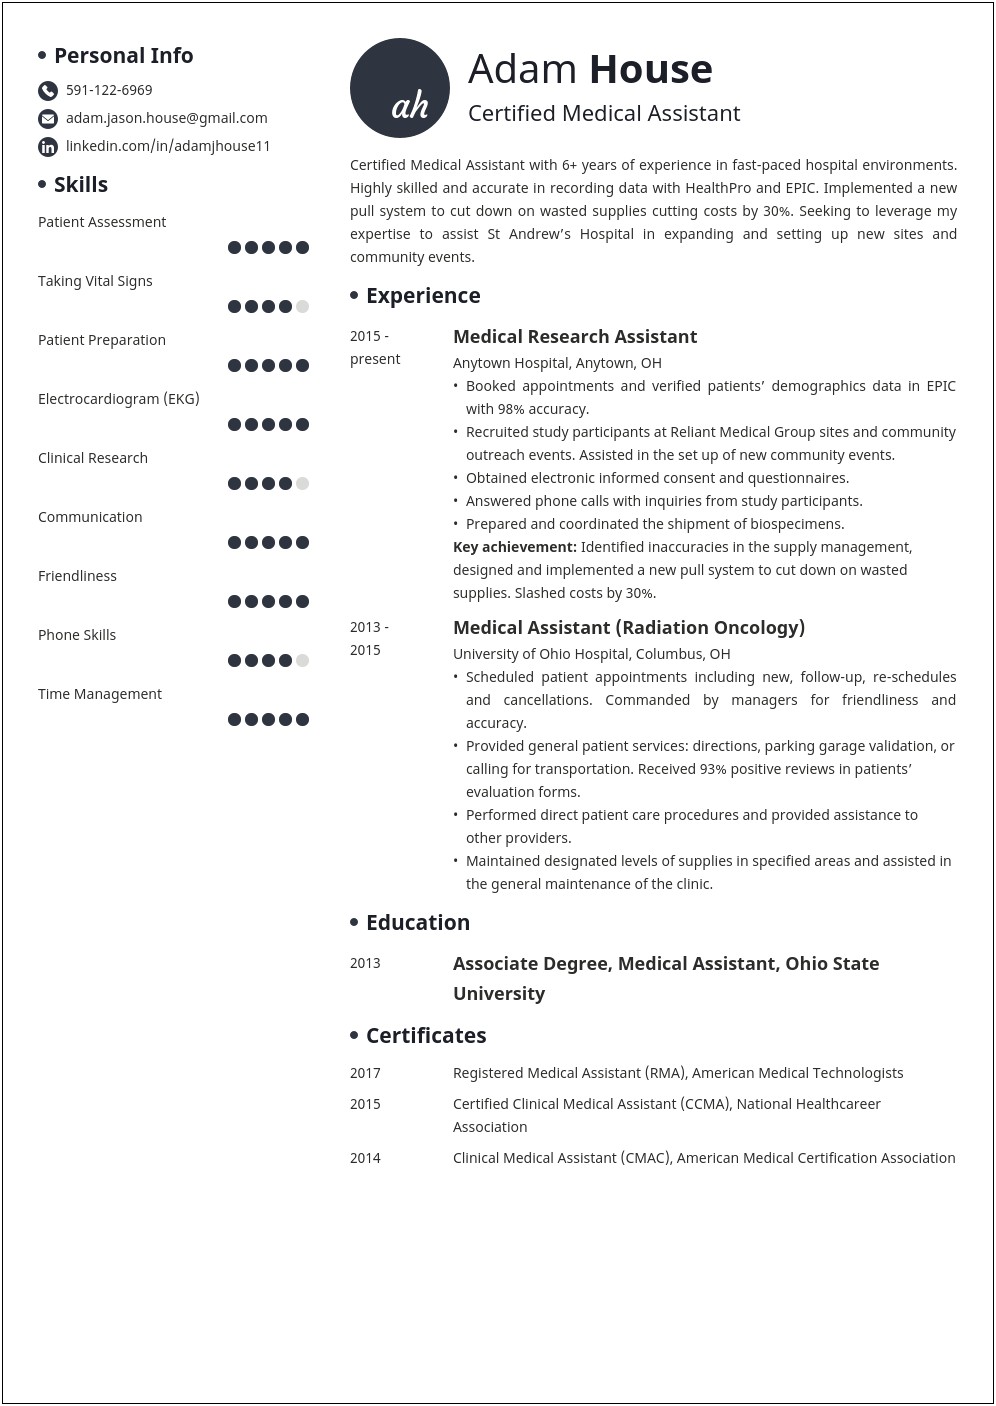 Sample Resume Of Student Medical Assistant